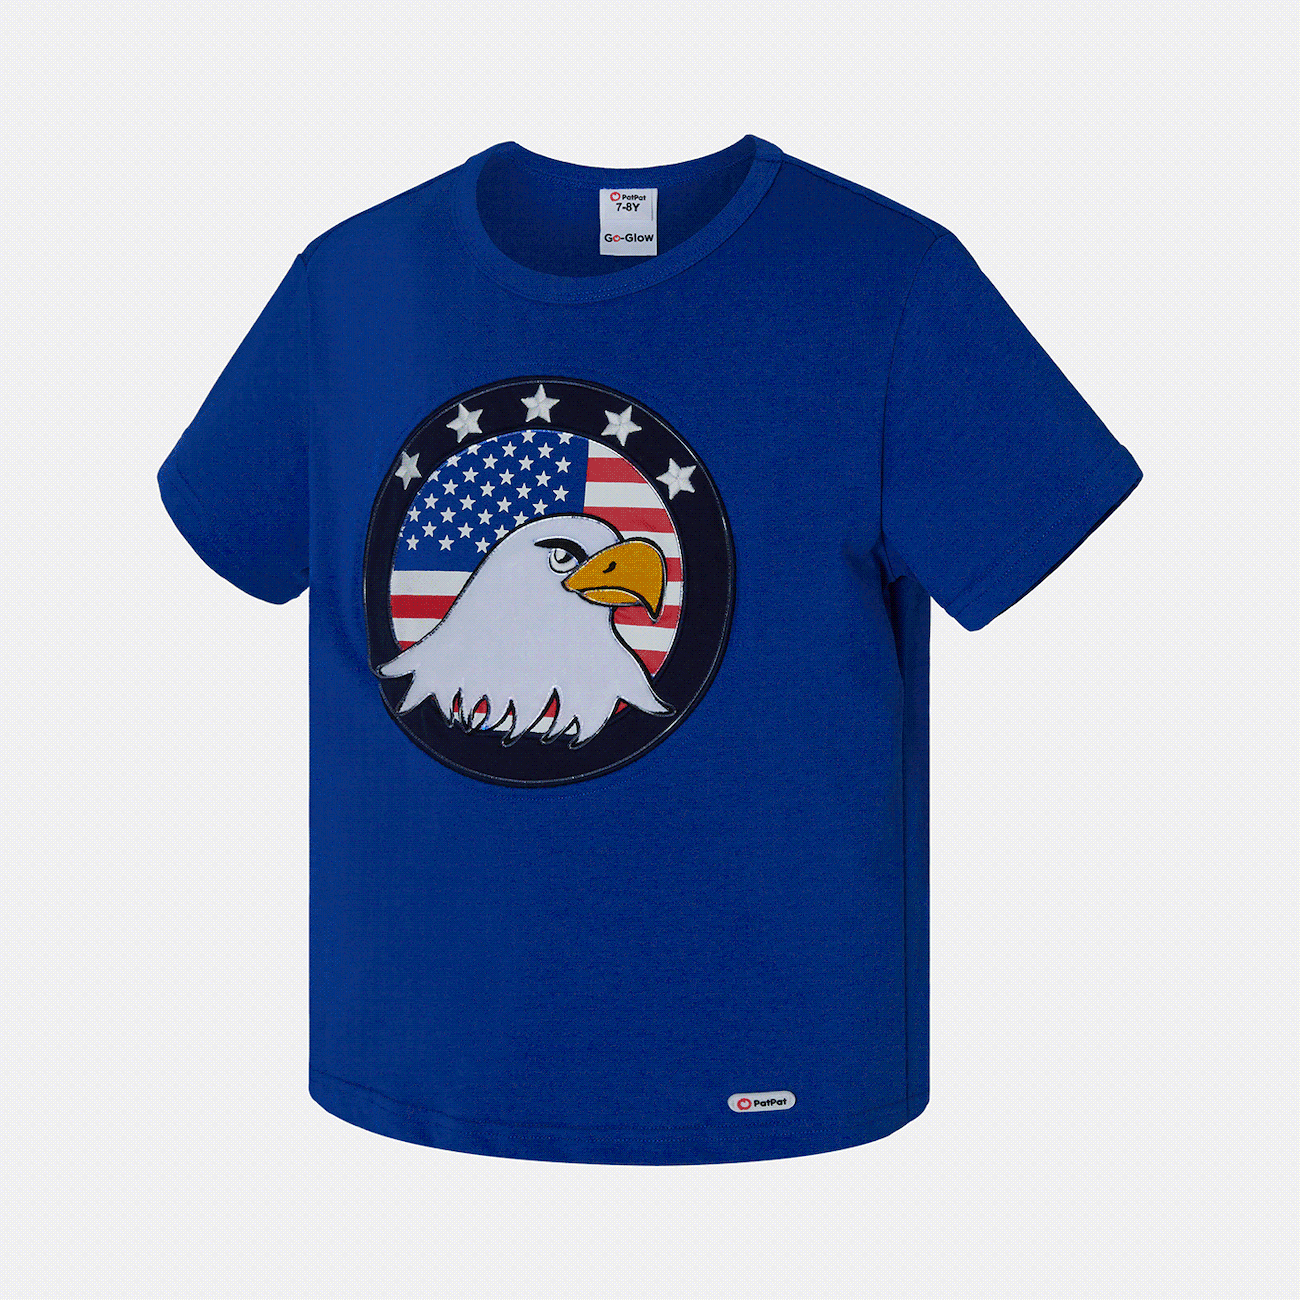 Go-Glow Illuminating T-shirt with Light Up Eagle Pattern Including Controller (Battery Inside) Blue big image 1